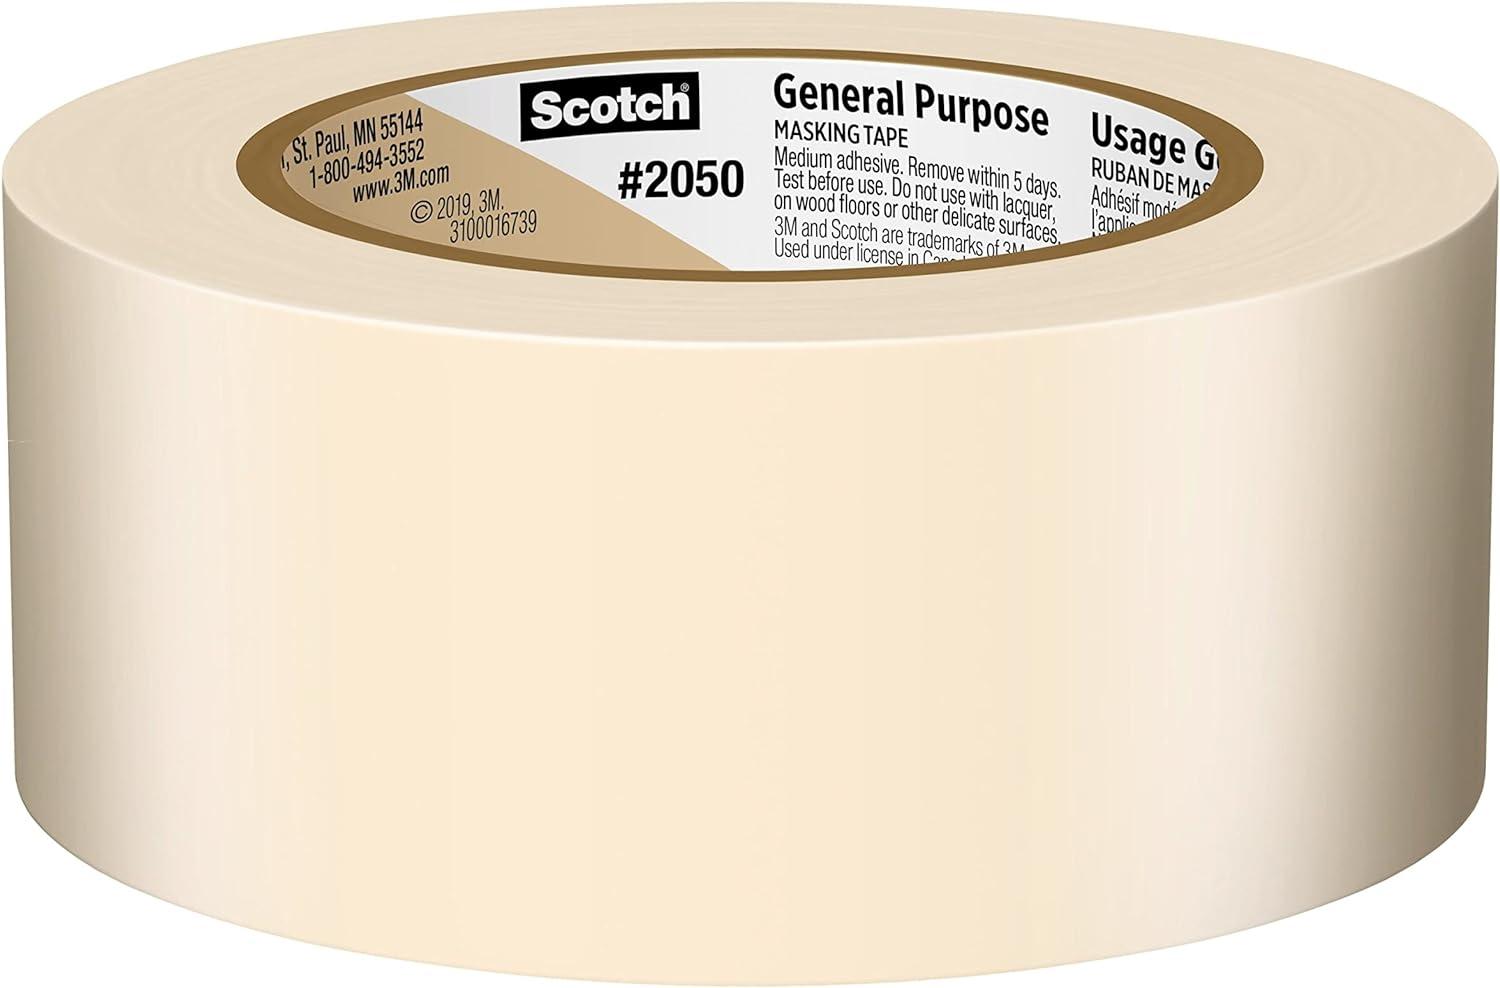 Scotch 2020 Contractor Grade 1.88-in x 60 Yard(s) Masking Tape in the  Masking Tape department at